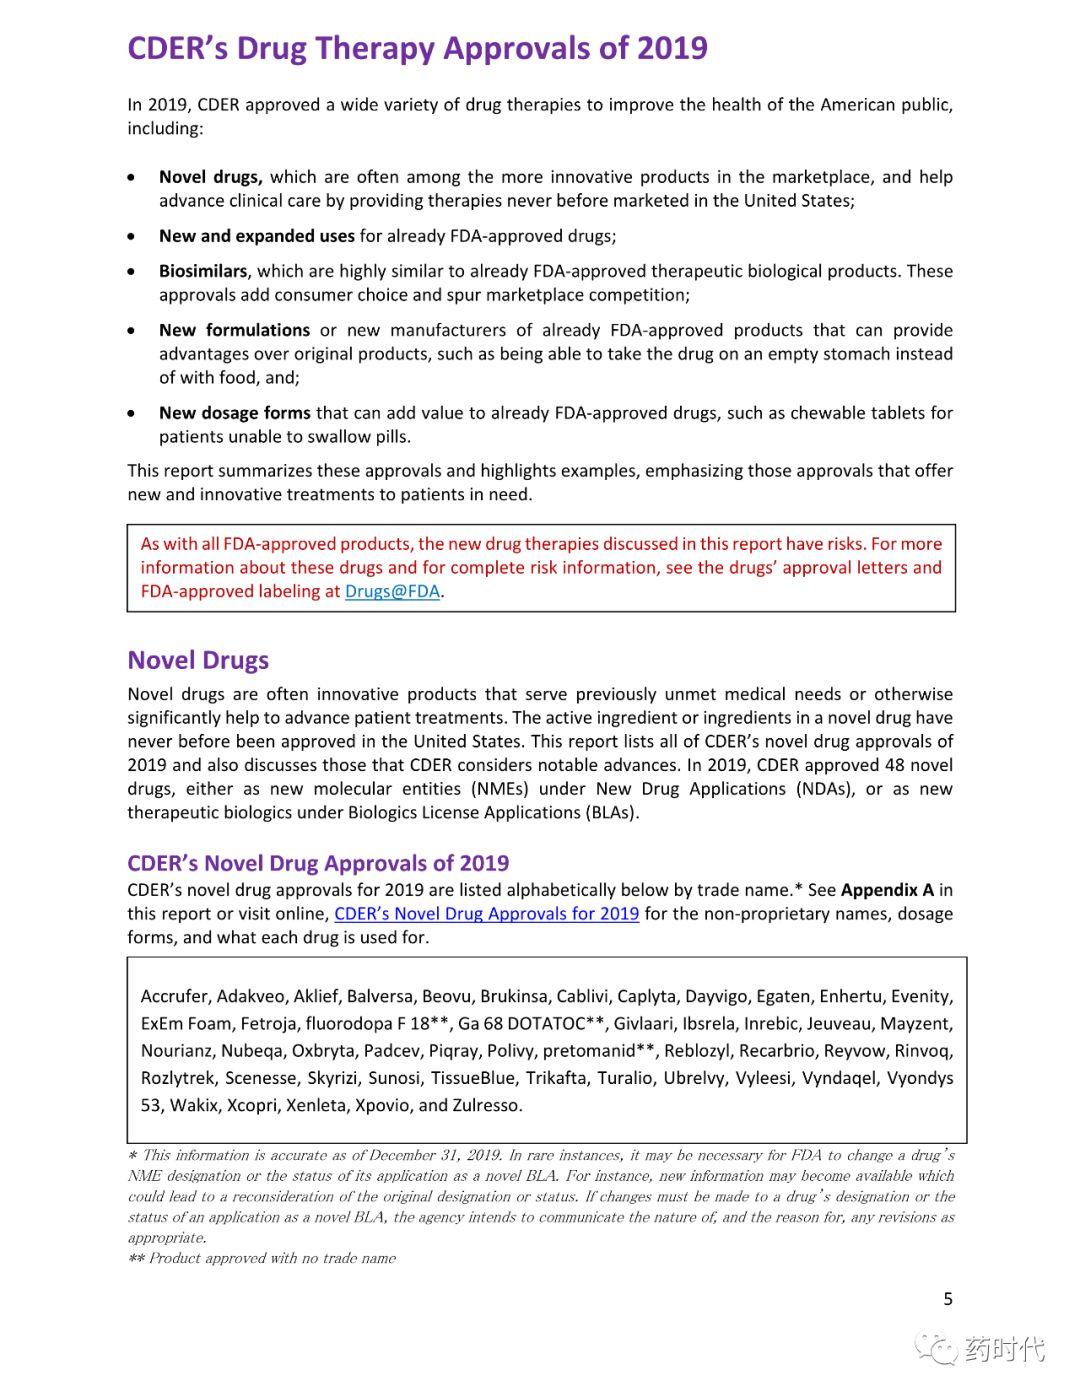 FDA官宣 | 2019年新药批准报告（2019 New Drug Therapy Approvals）